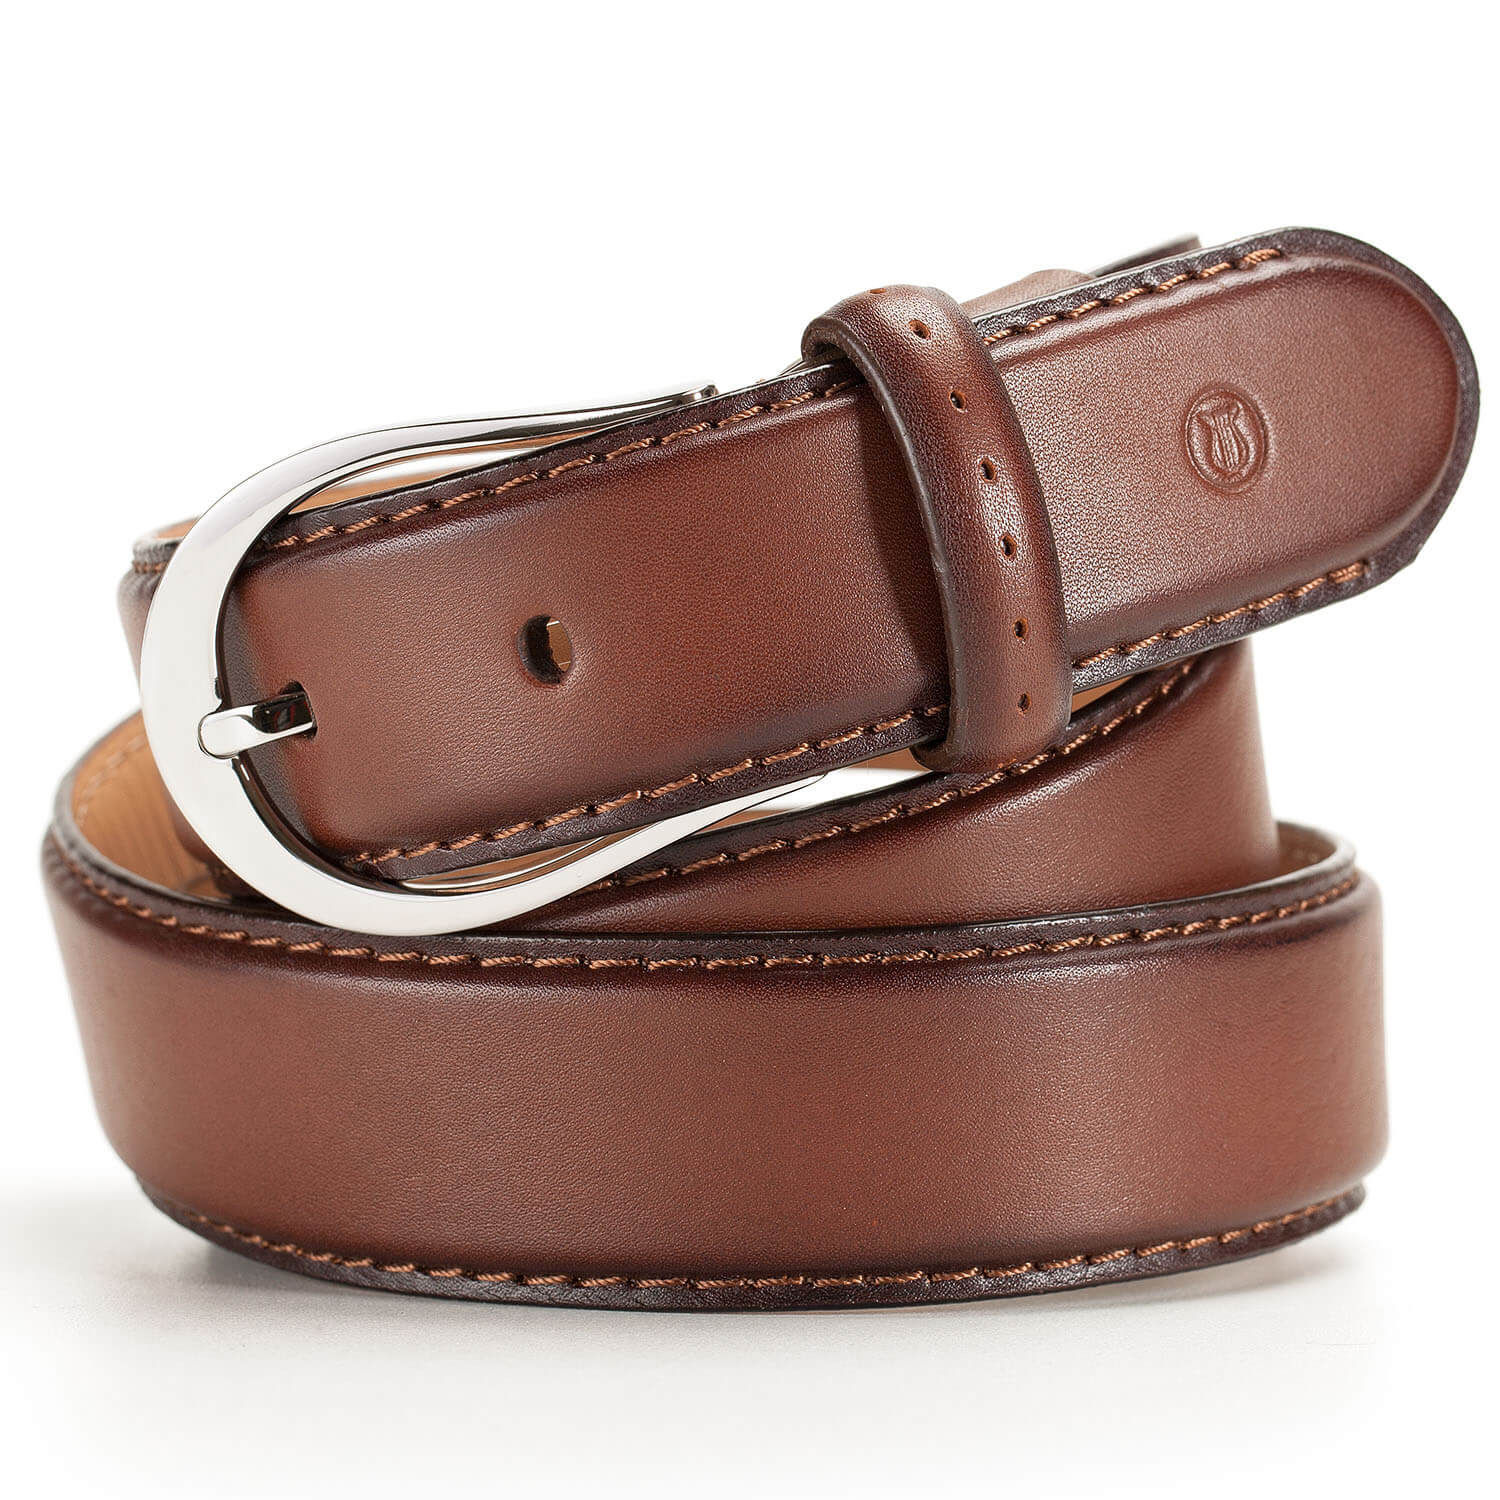 Lapis Bard Sullivan Silver 35Mm Buckle With Two Tone Leather Strap - Cognac